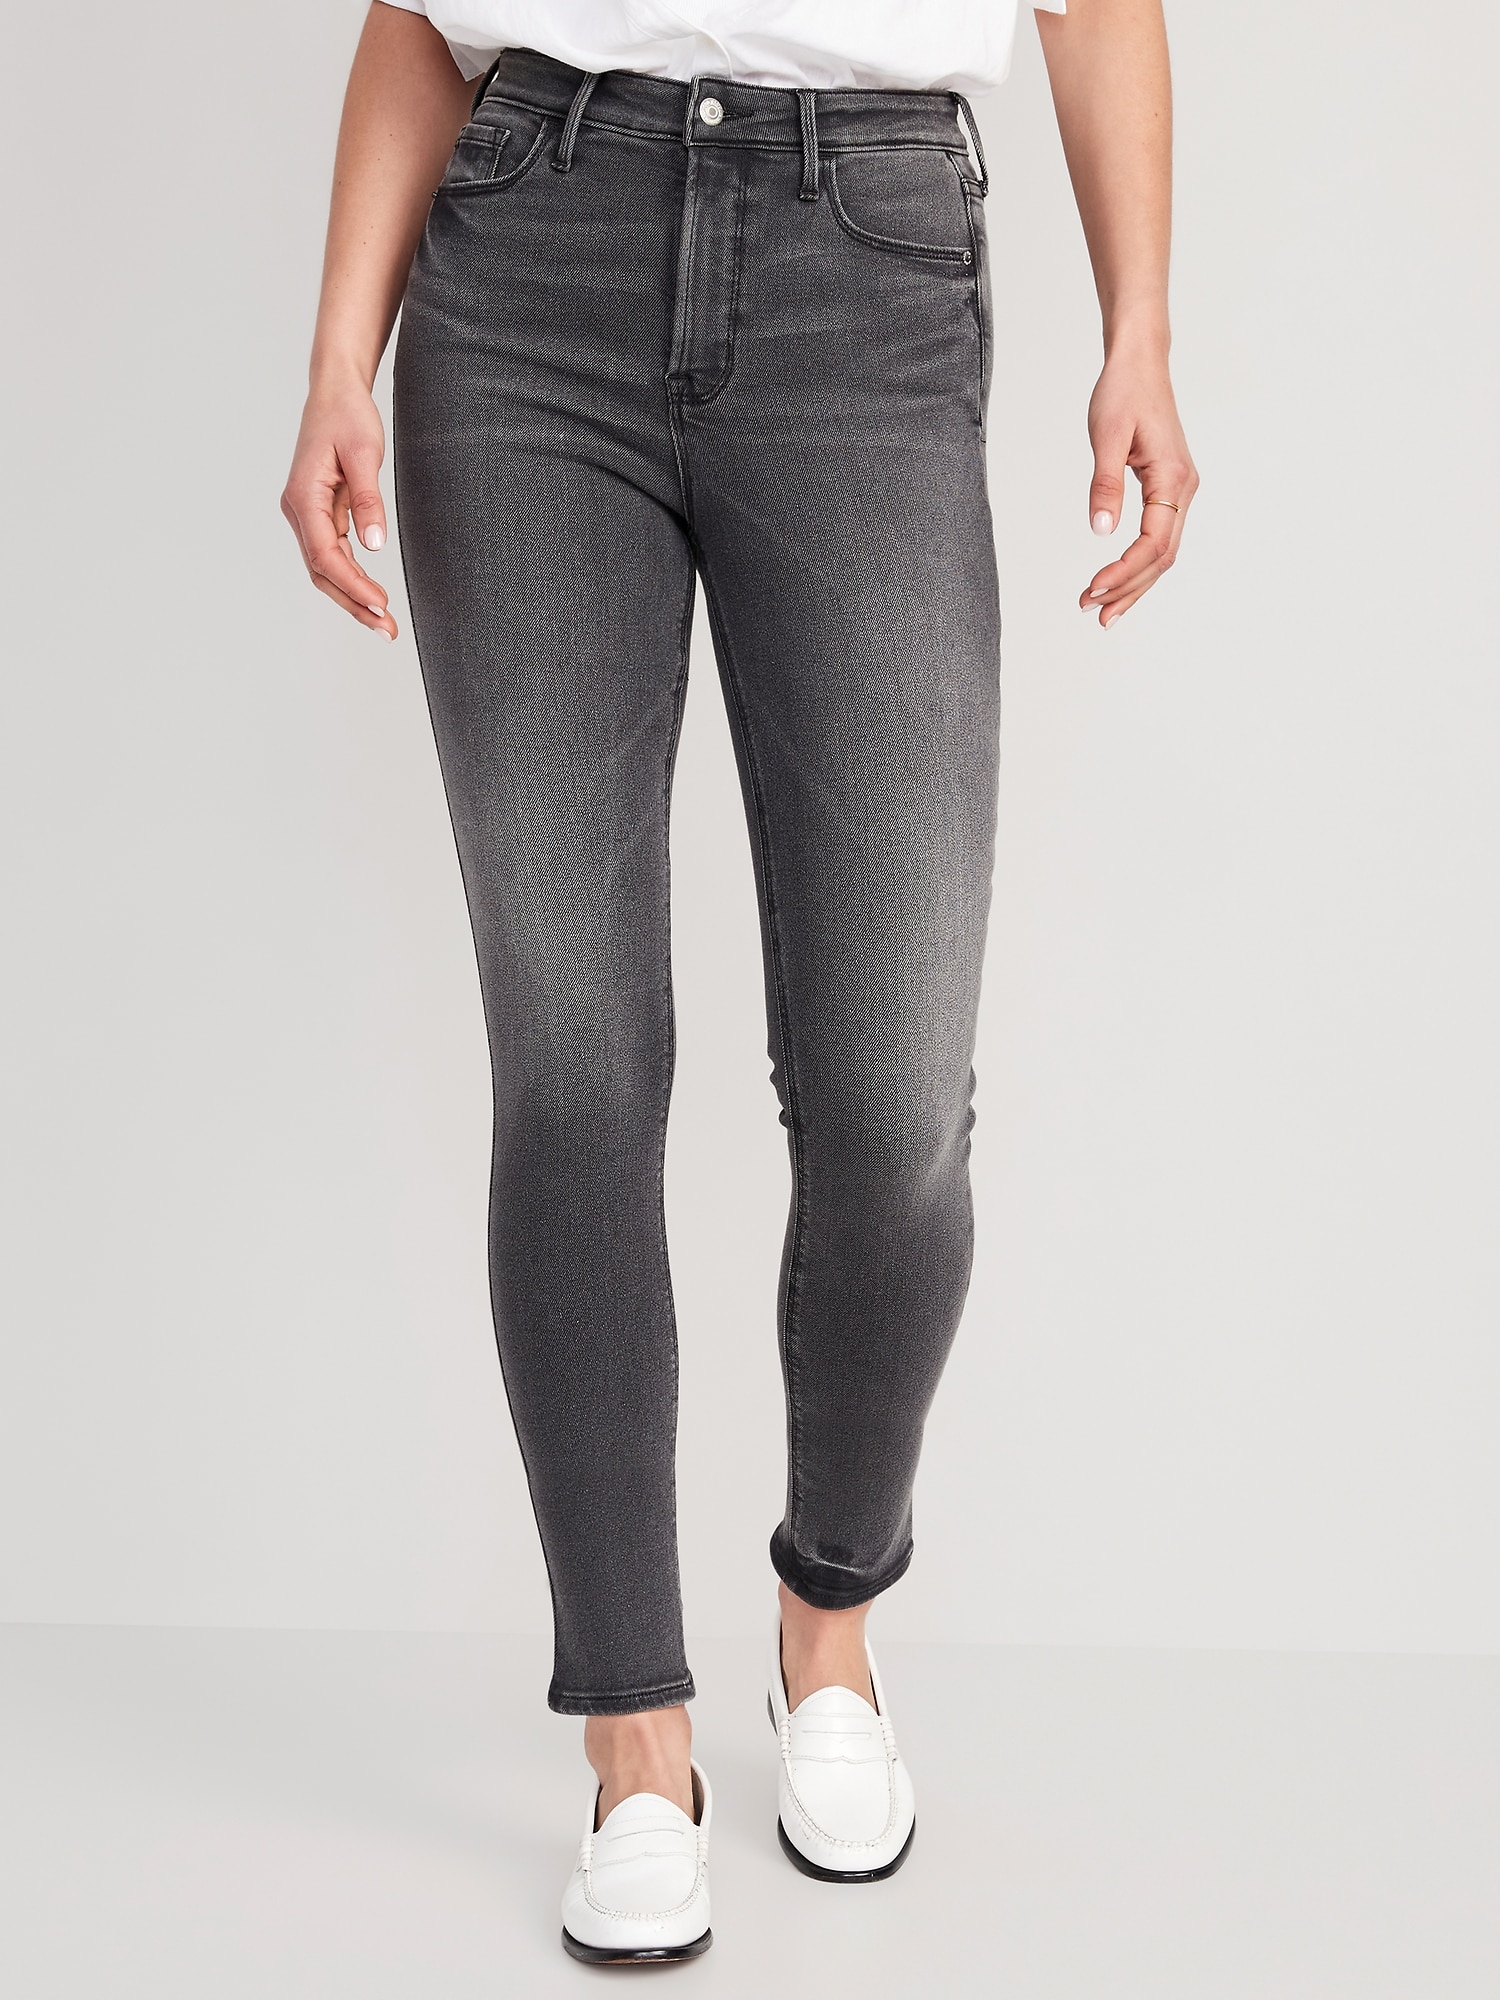 Old Navy Extra High-Waisted Jeans Review